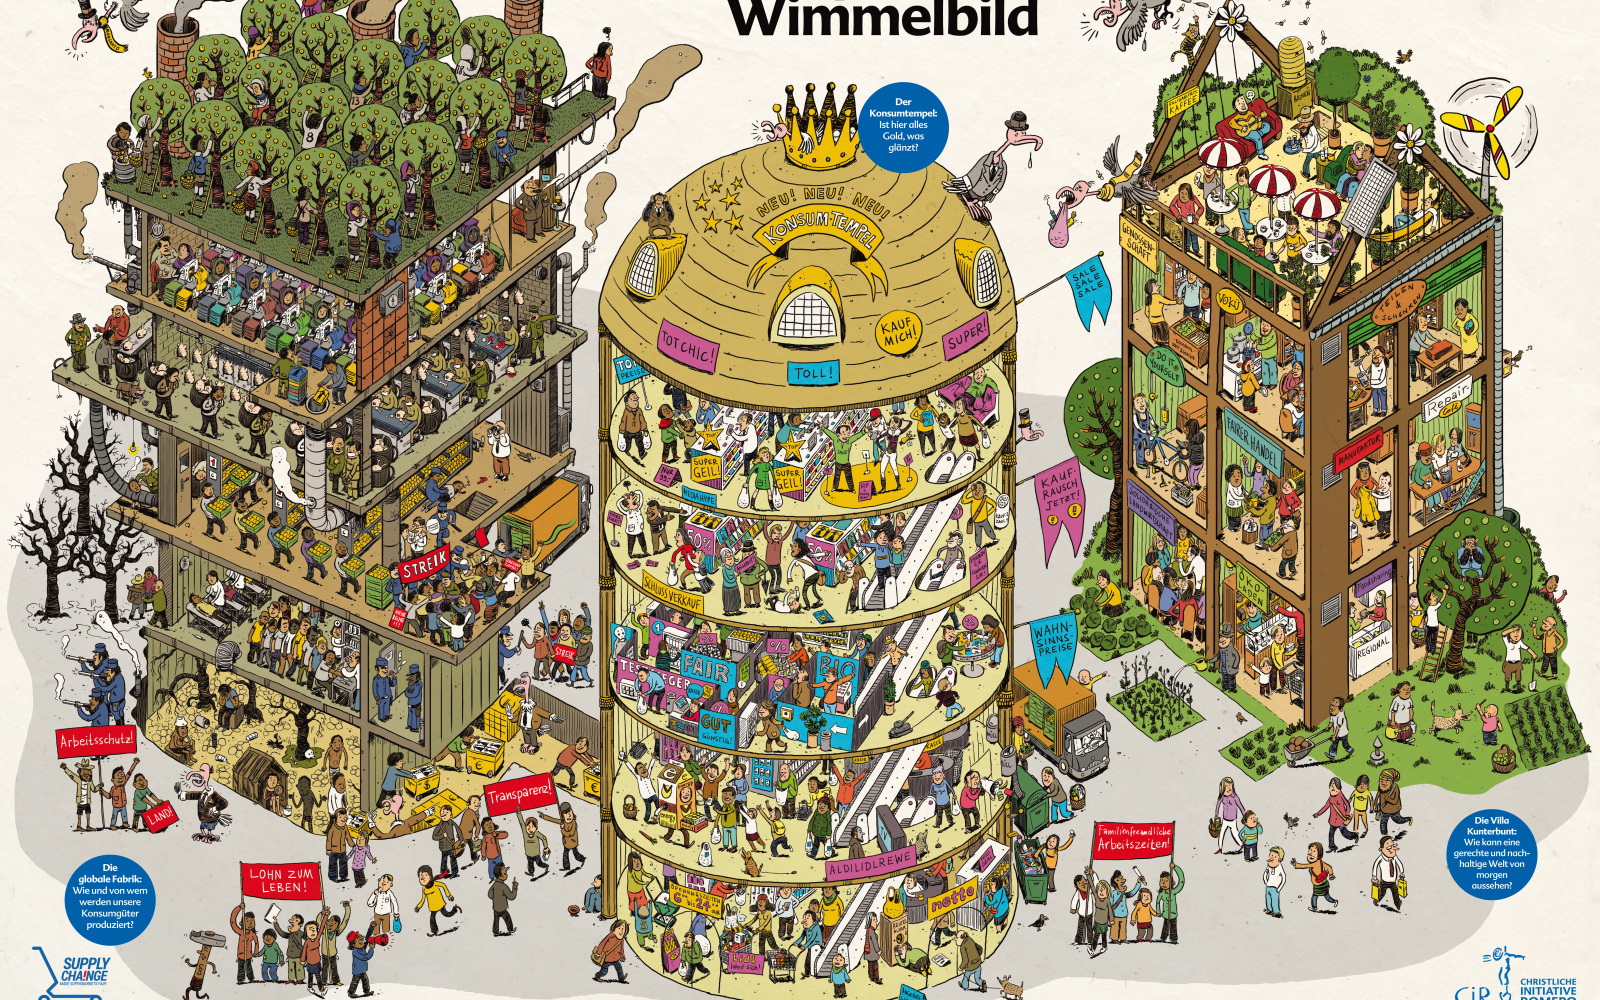 Three towers can be seen on the hidden object picture. The left tower shows the various effects of global consumerism at the places of production. In the middle is the shiny "temple of consumption", the supermarket. On the right is the "Villa Kunterbunt",